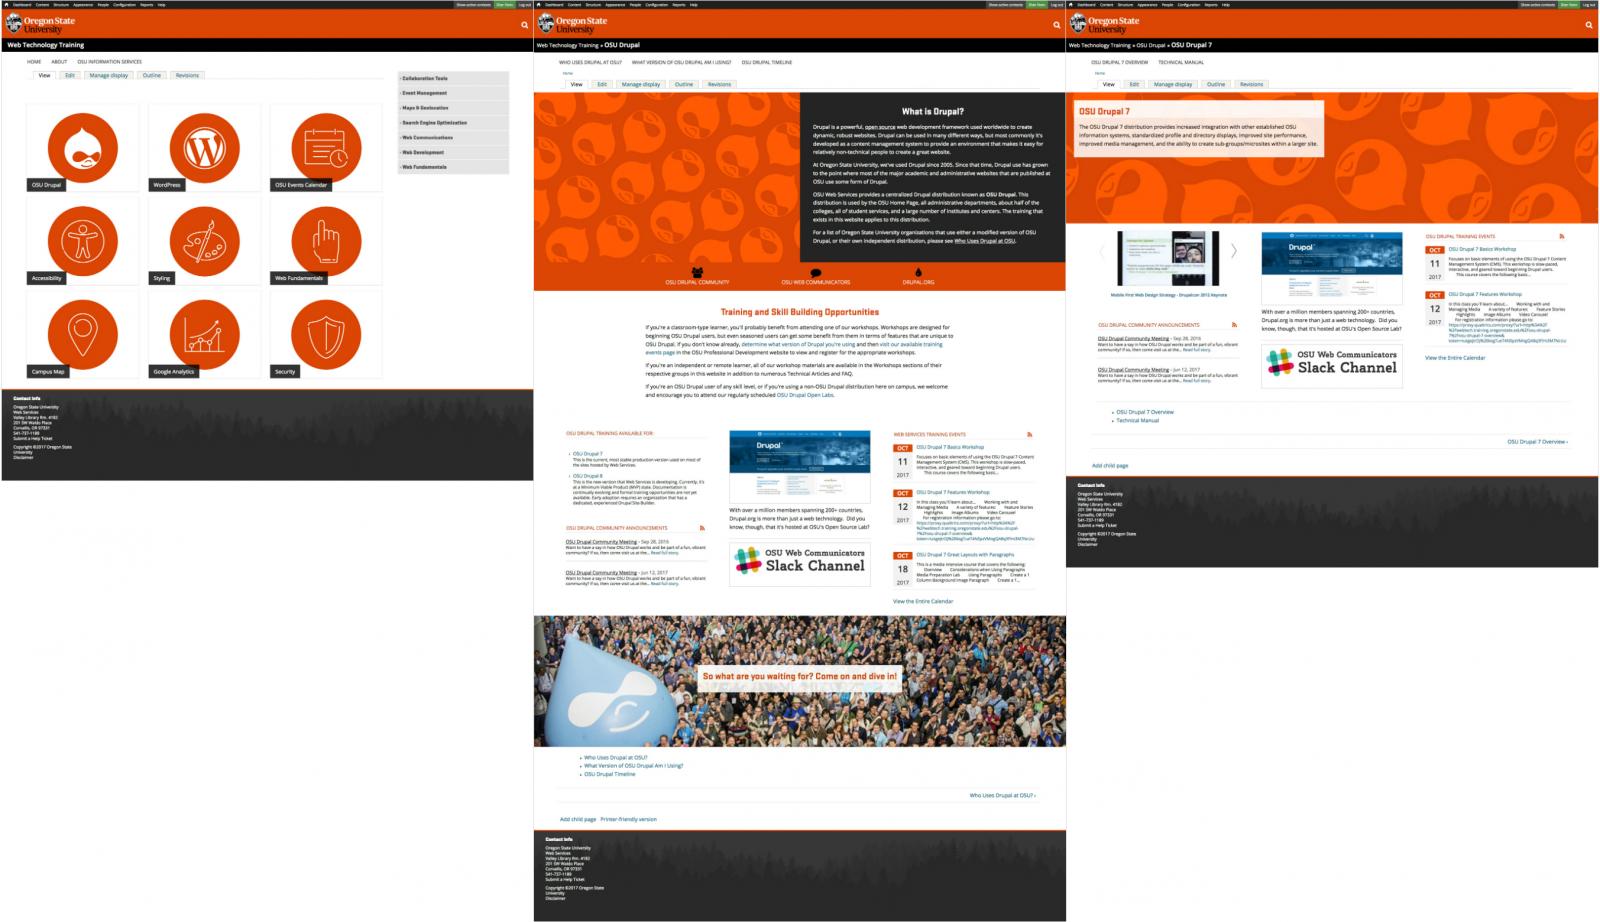 a side by side comparision of the home page, a group parent page, and a group child page